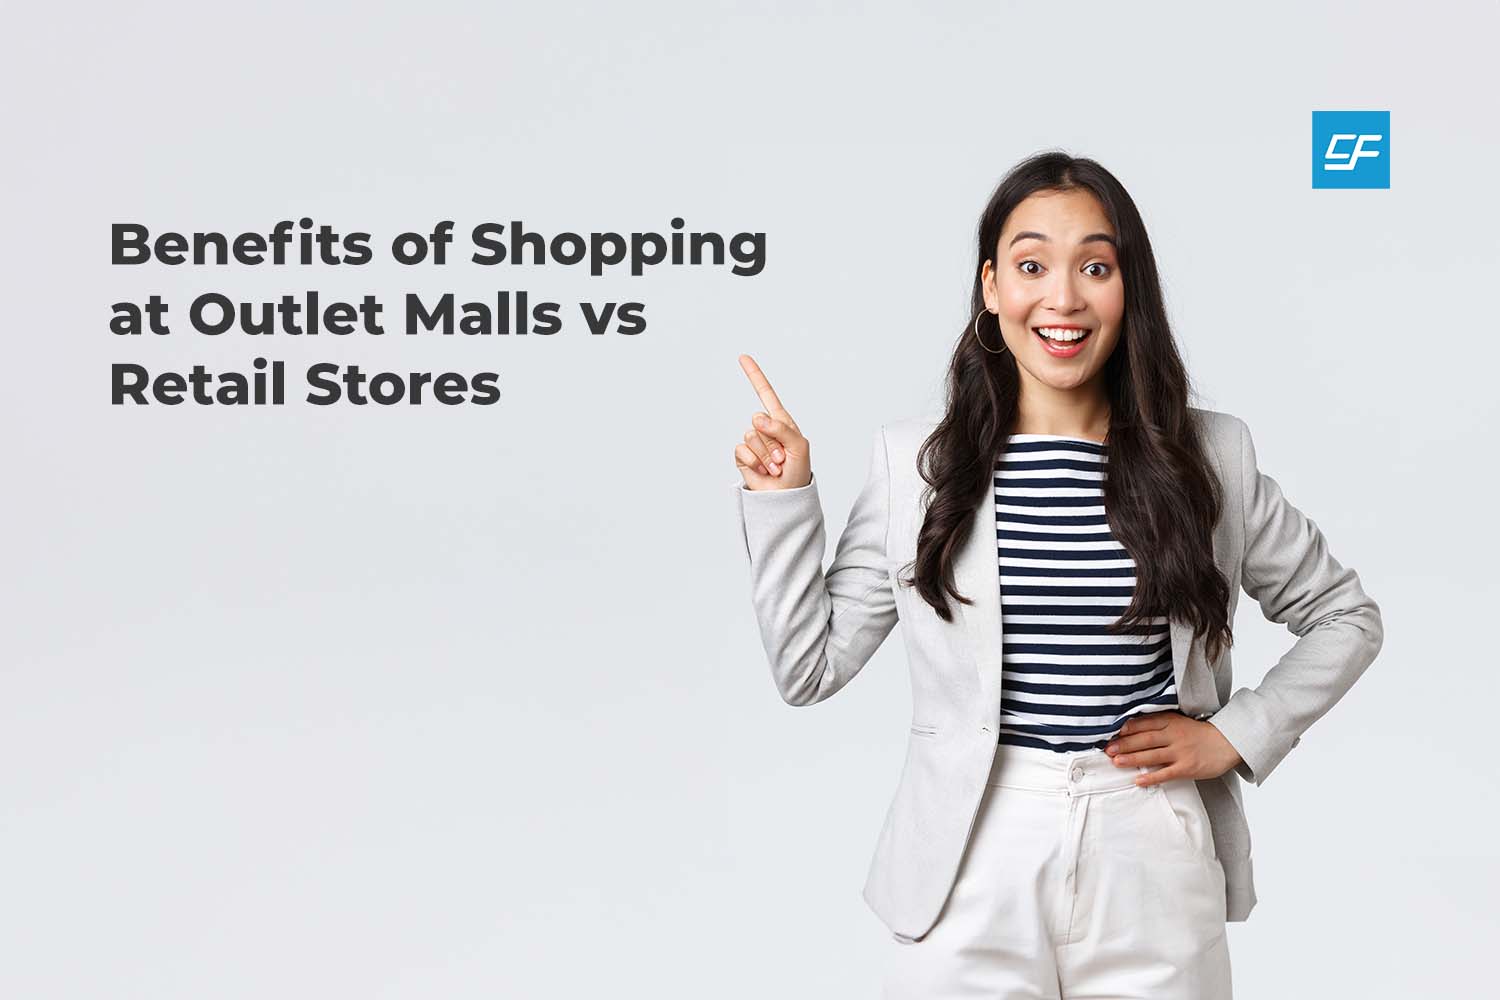 Outlet Malls vs Retail Stores